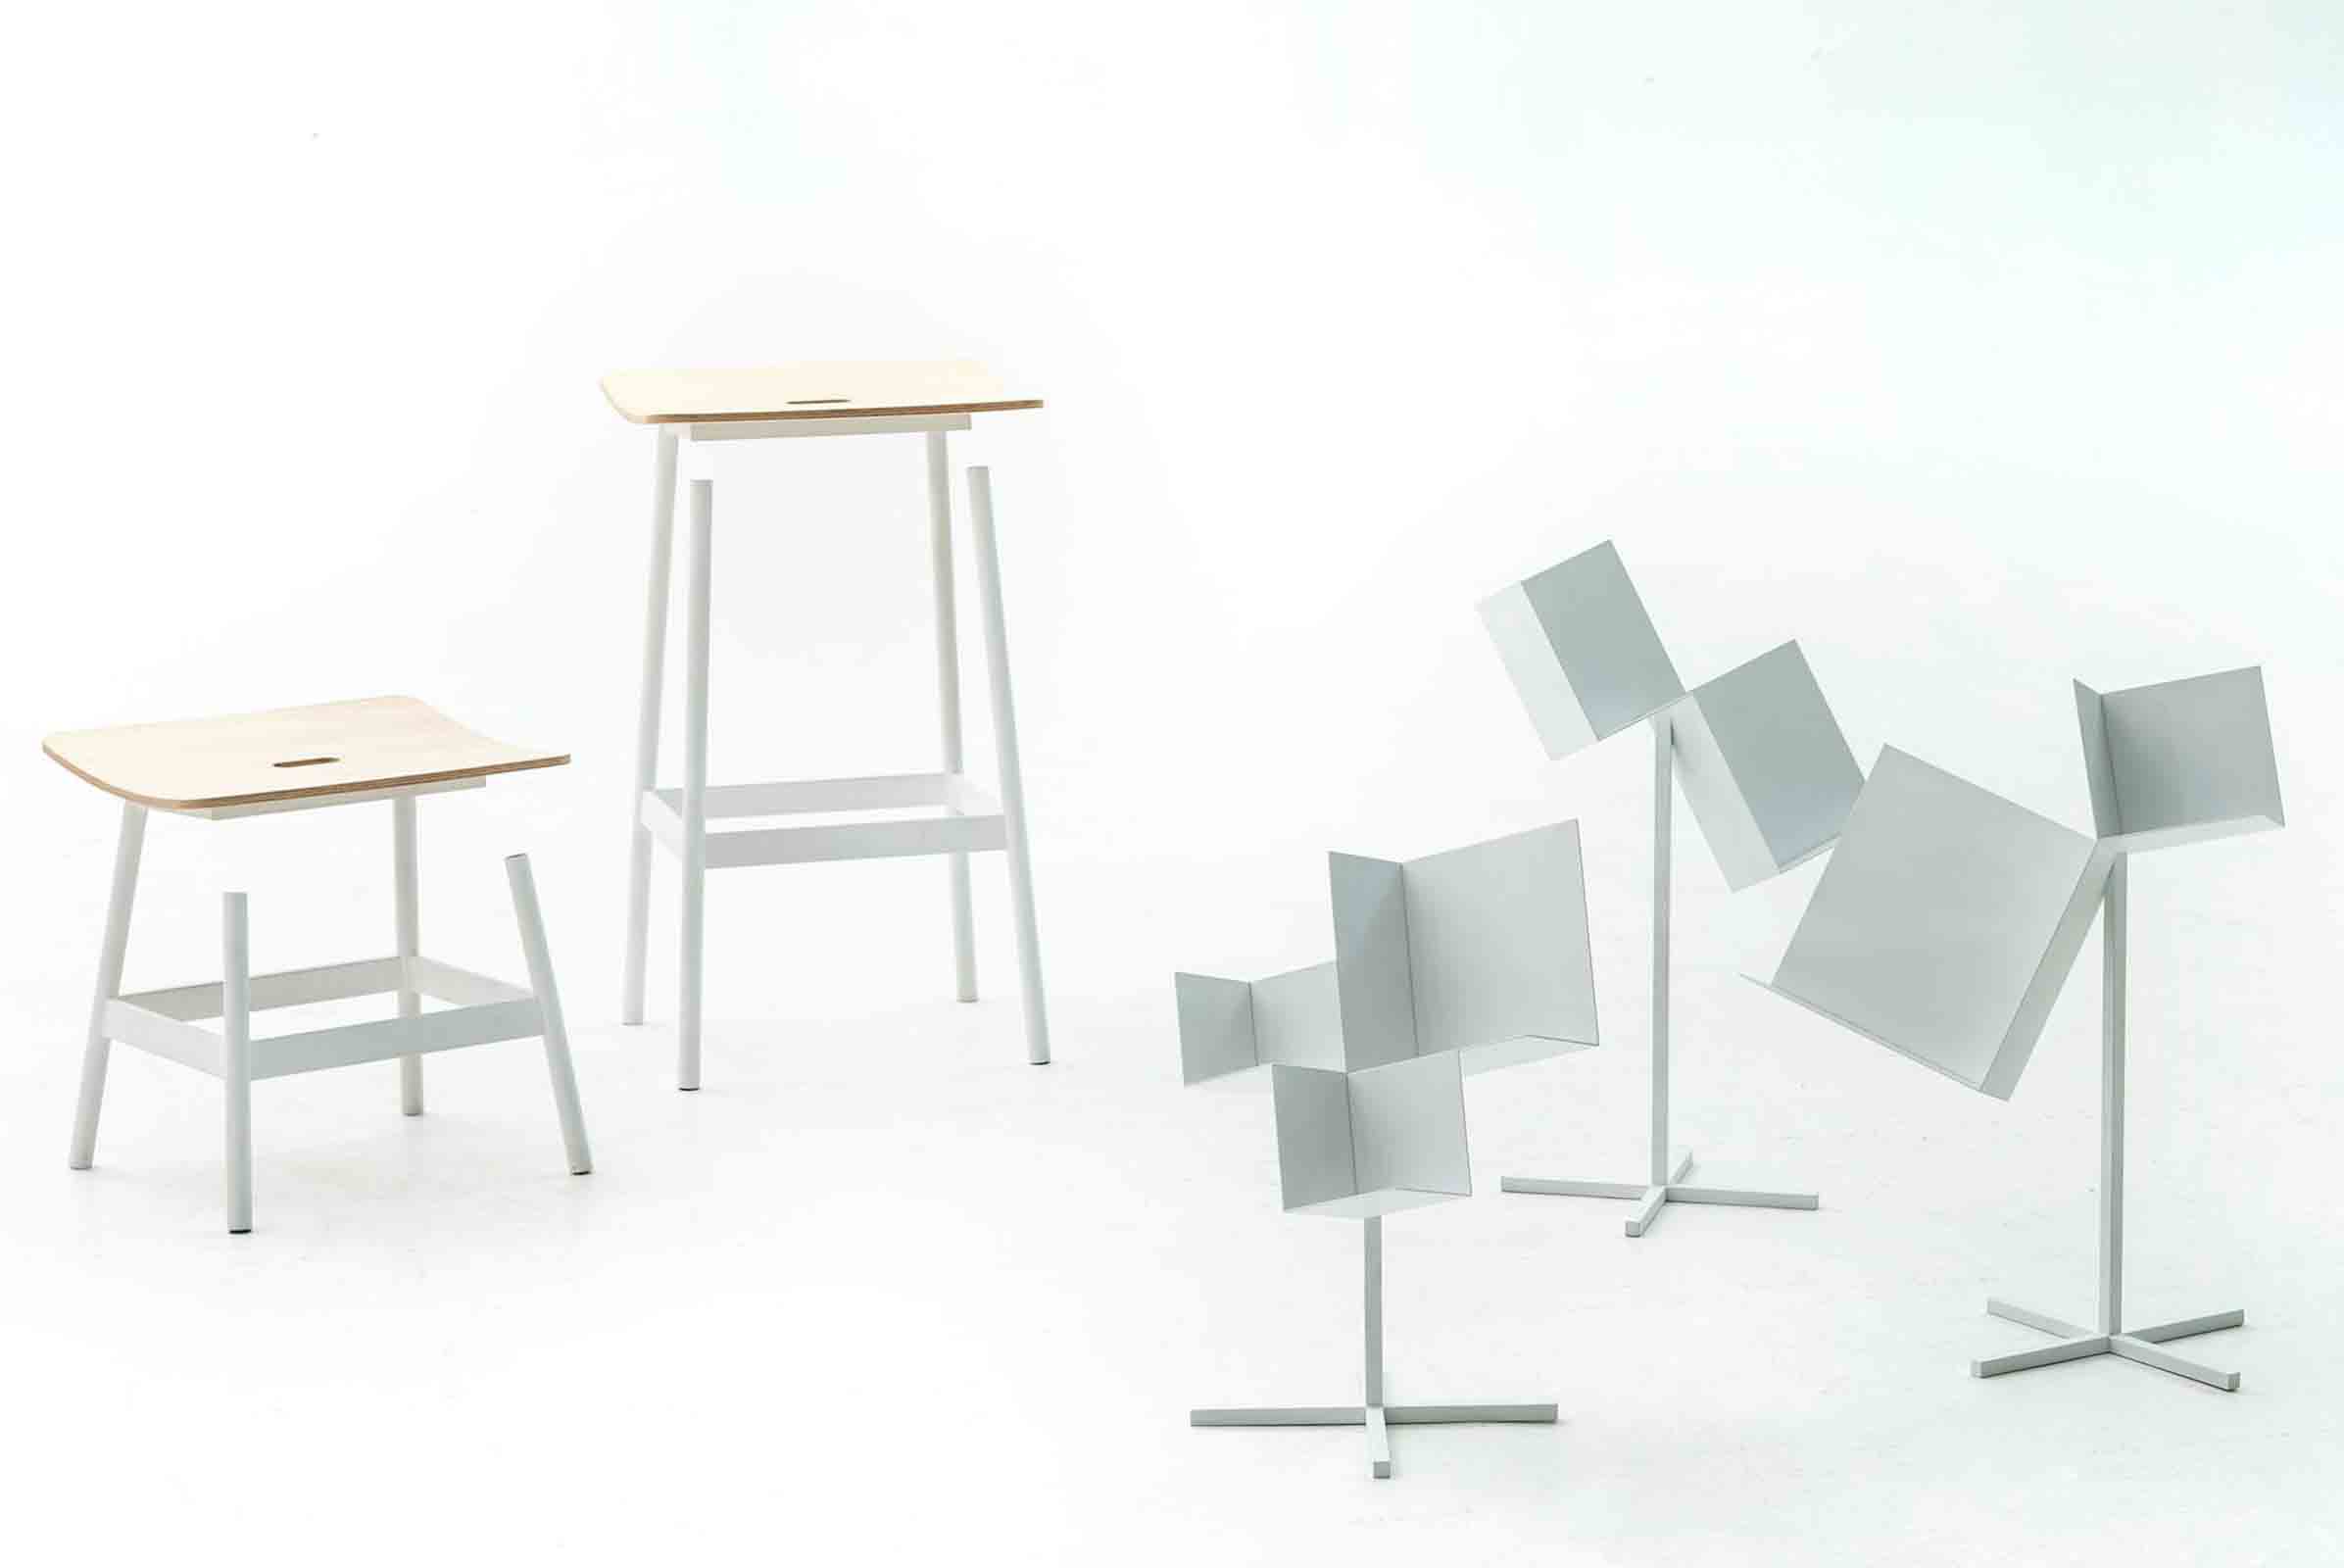 ‘Float’ stools and ‘Corners’ storage designed by nendo for Moroso